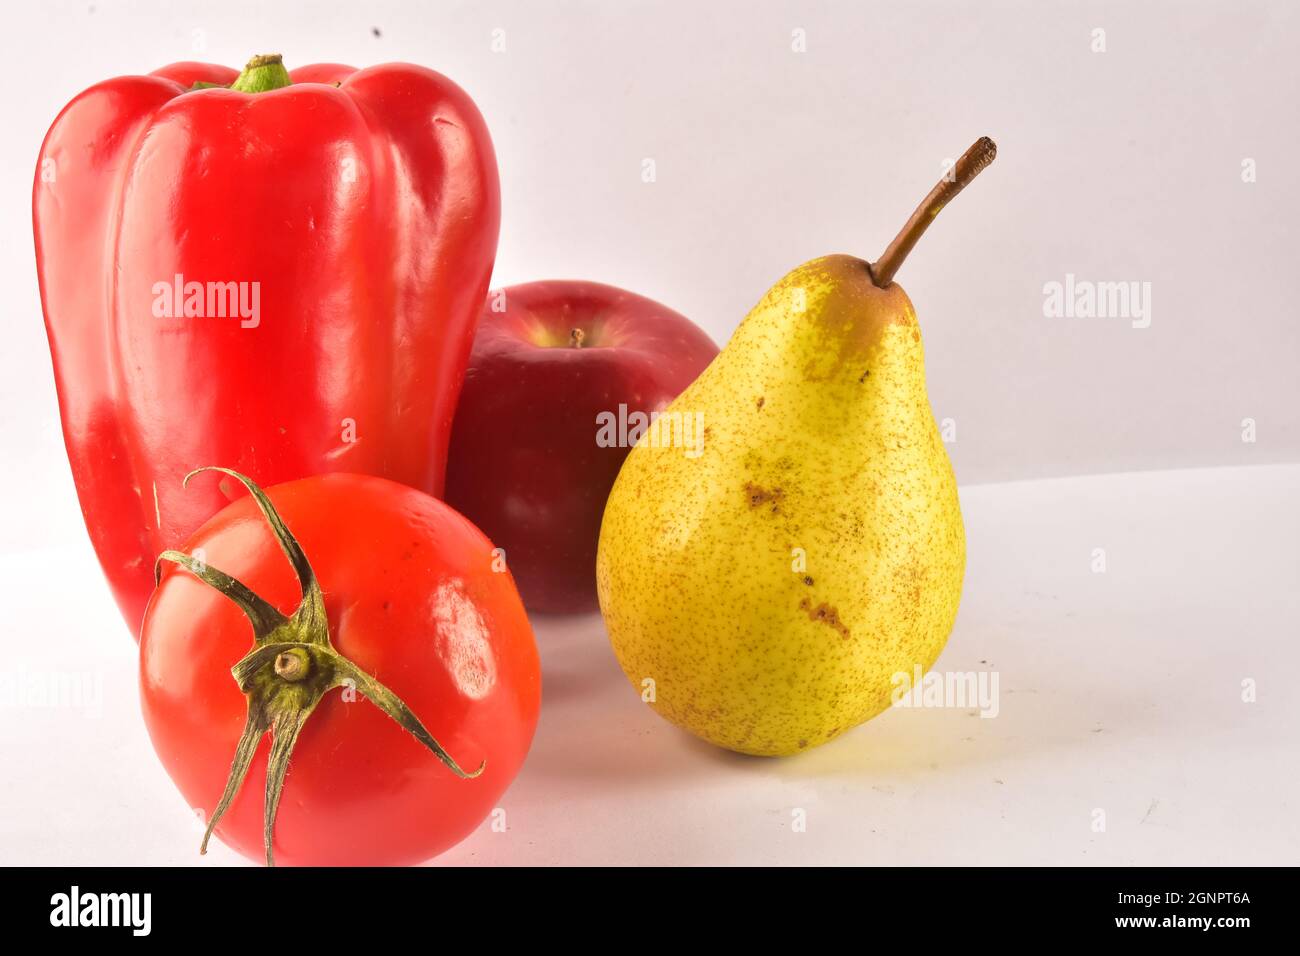 Red pepper, pear, tomato and apple on the table Stock Photo